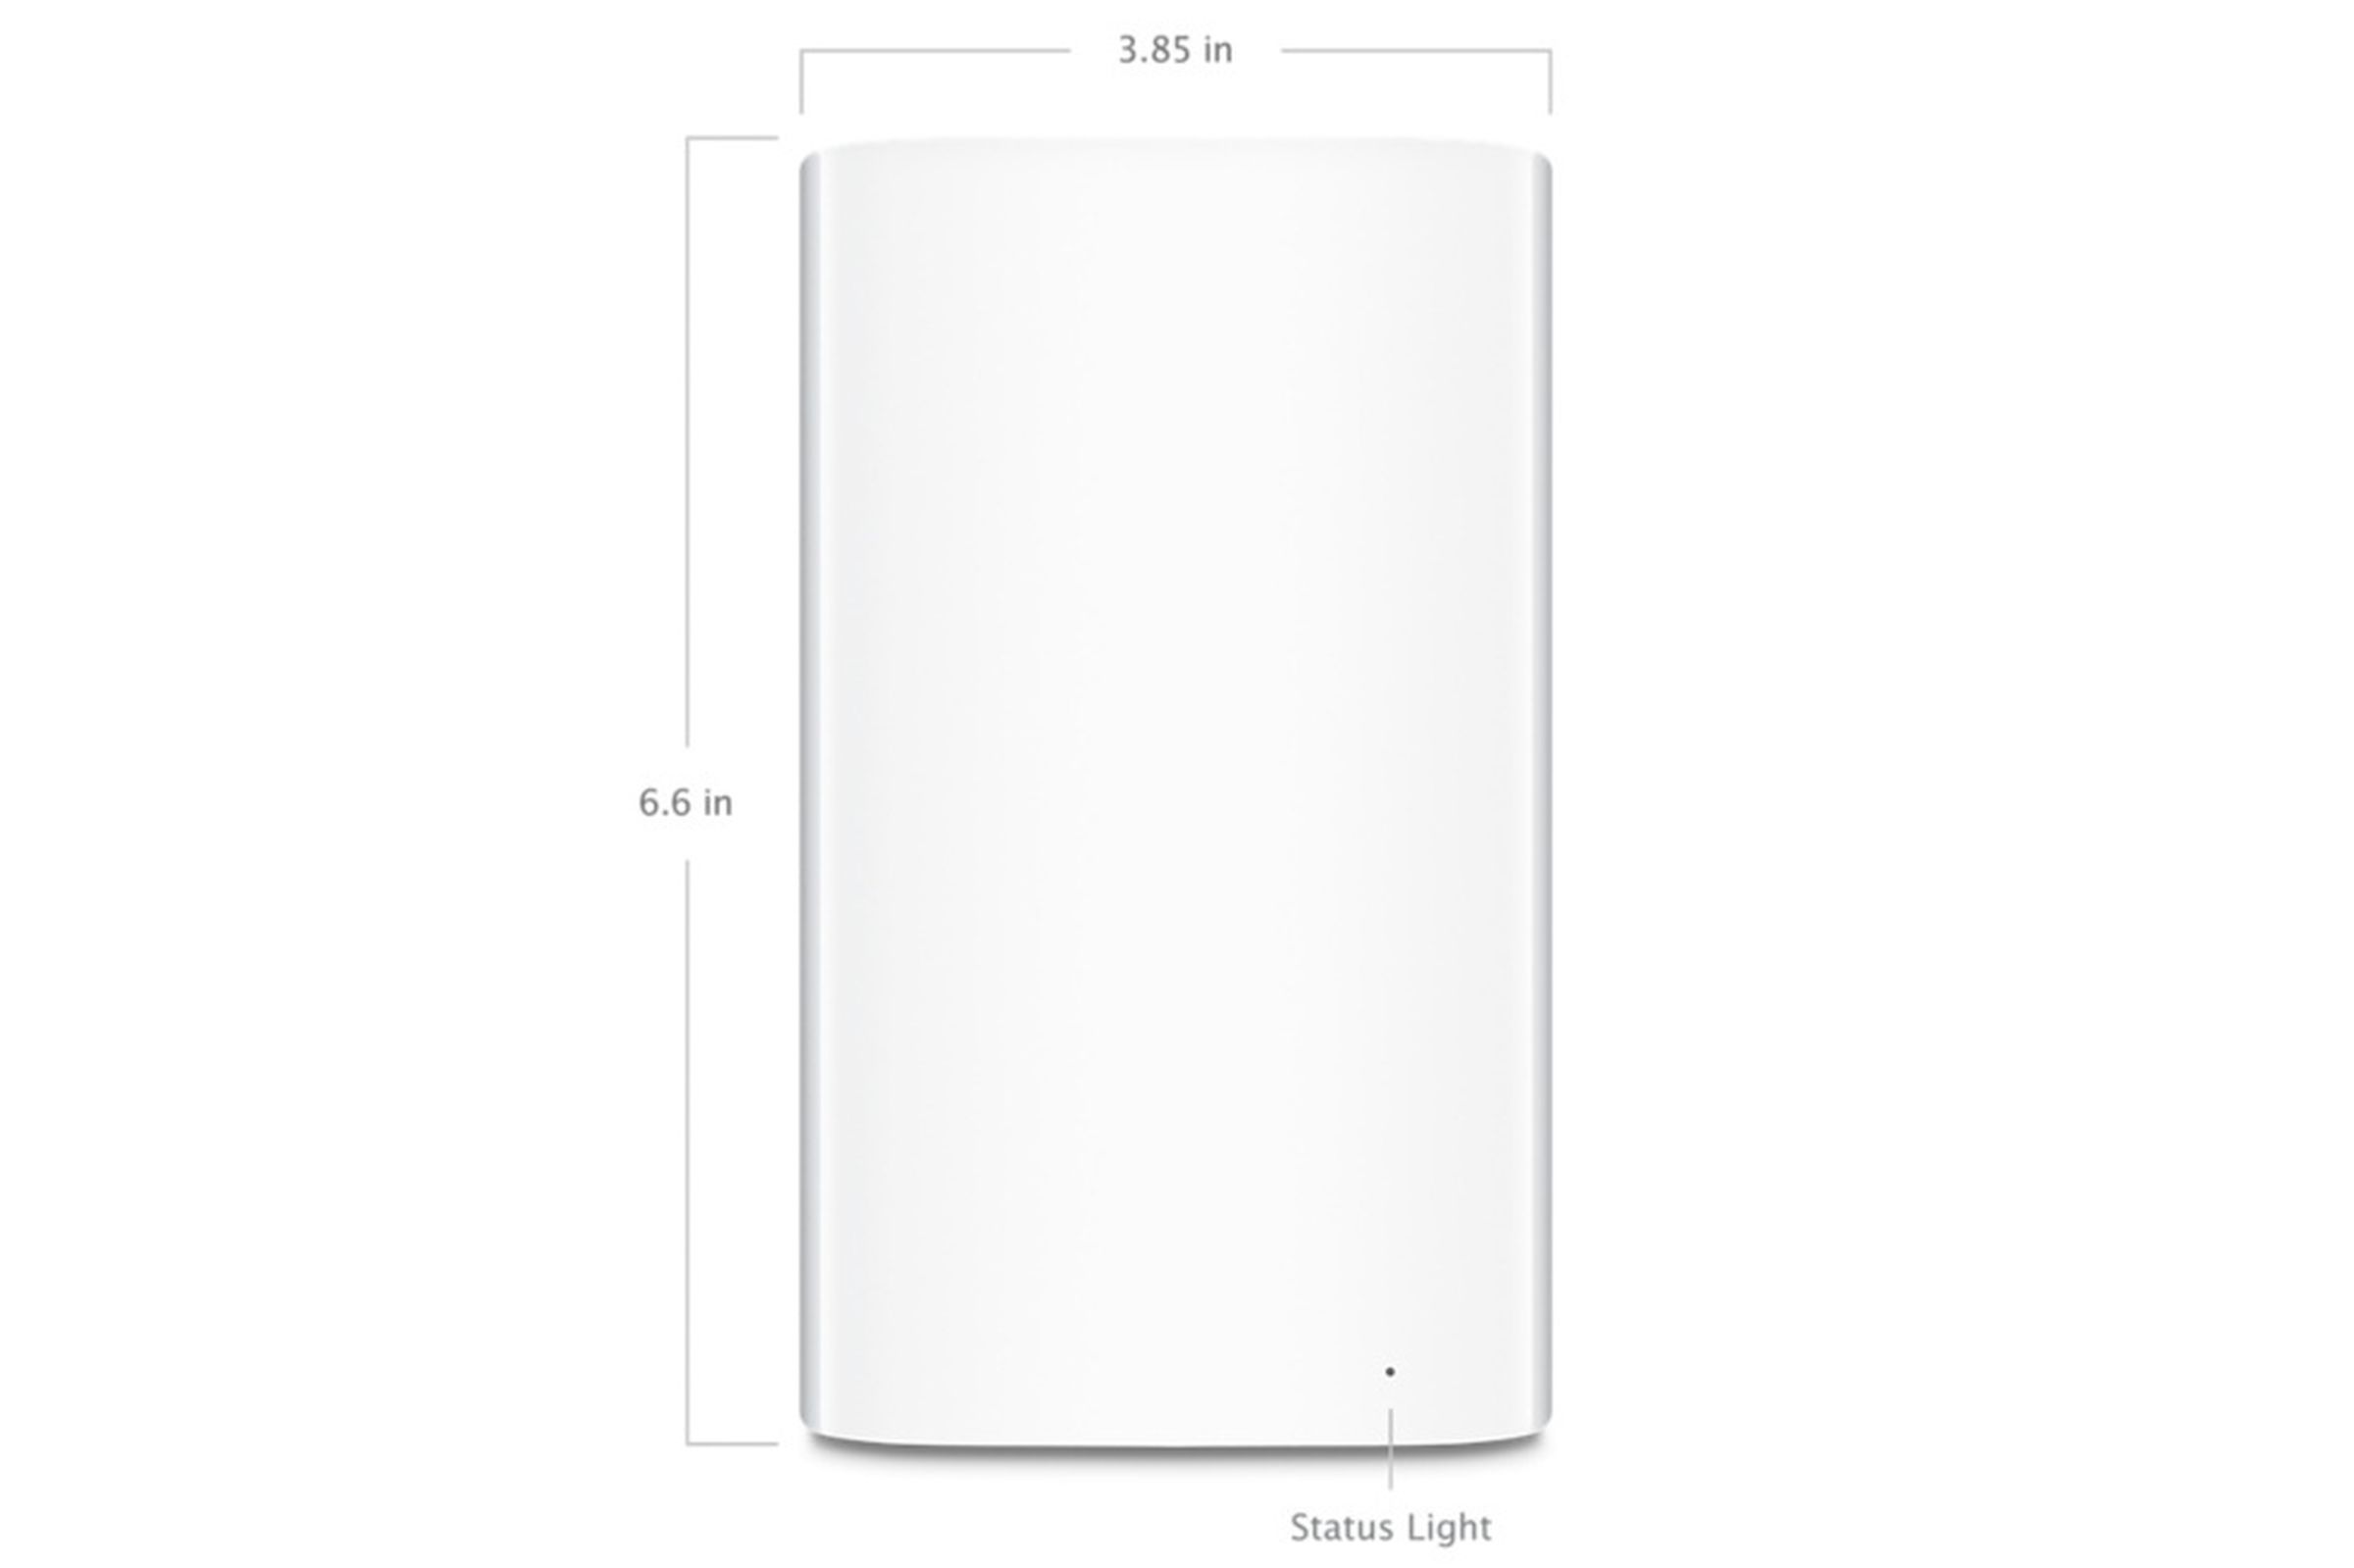 Apple AirPort Extreme and Time Capsule official images